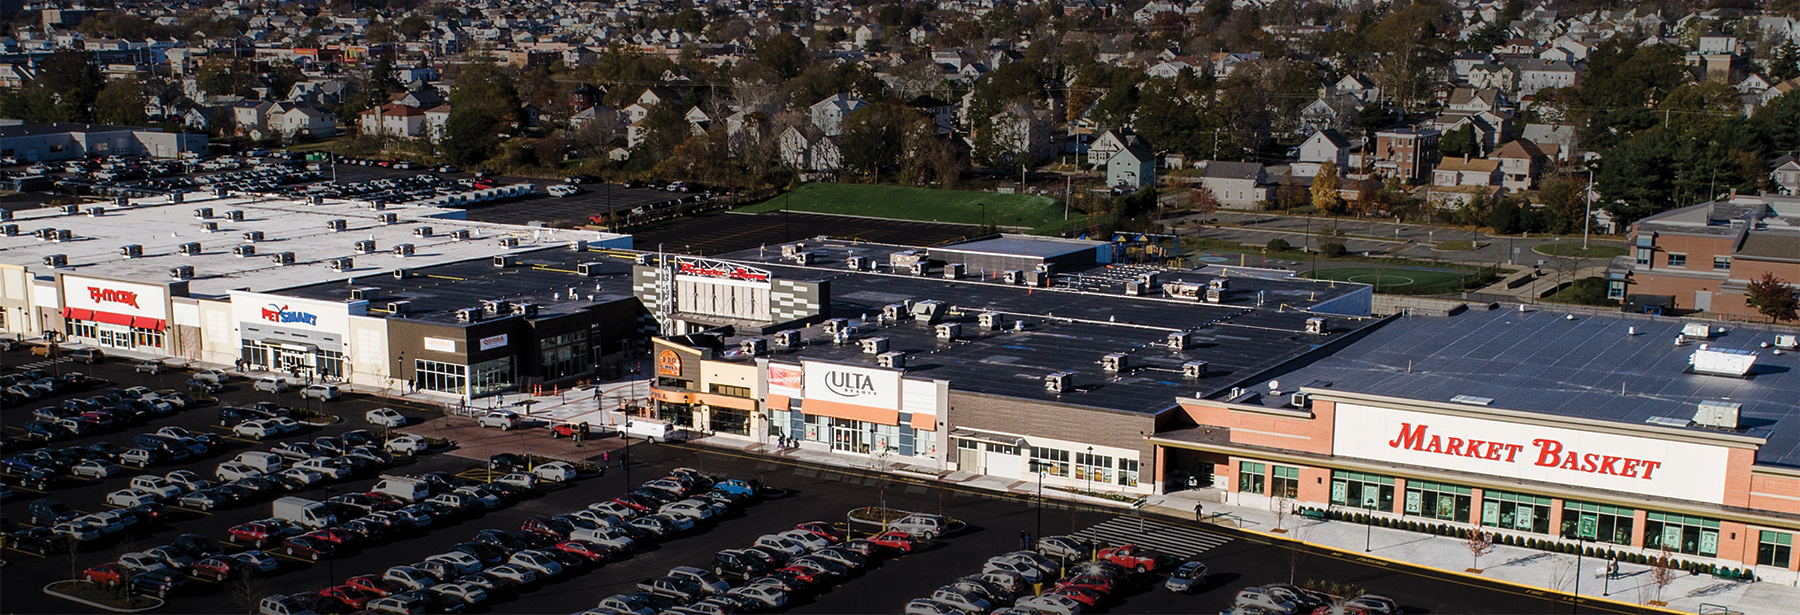 Featured Property of the Month: CEA Group, The Stonewood Companies and  Market Basket open SouthCoast Marketplace : NEREJ